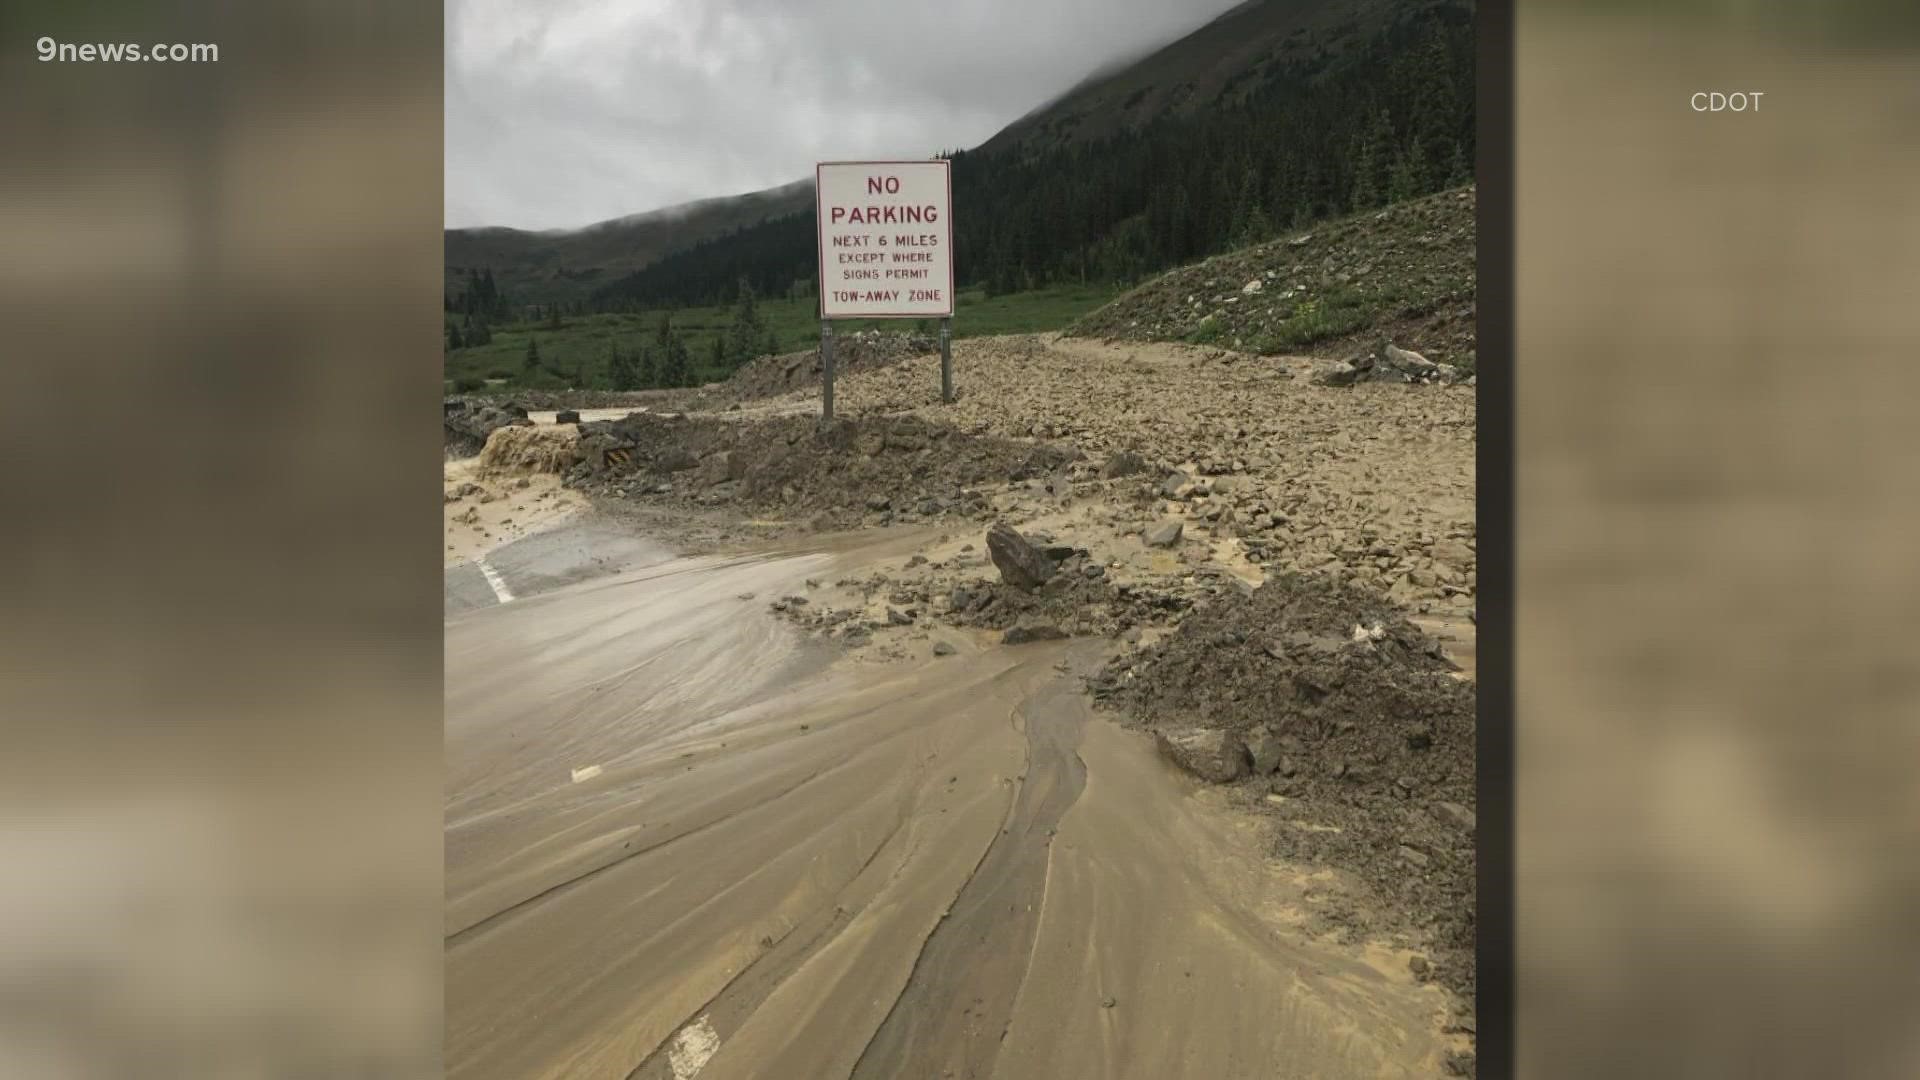 Interstate 70 through Glenwood Canyon will remain closed in both directions due to "extreme damage" from heavy rain and flooding Saturday night, CDOT said.